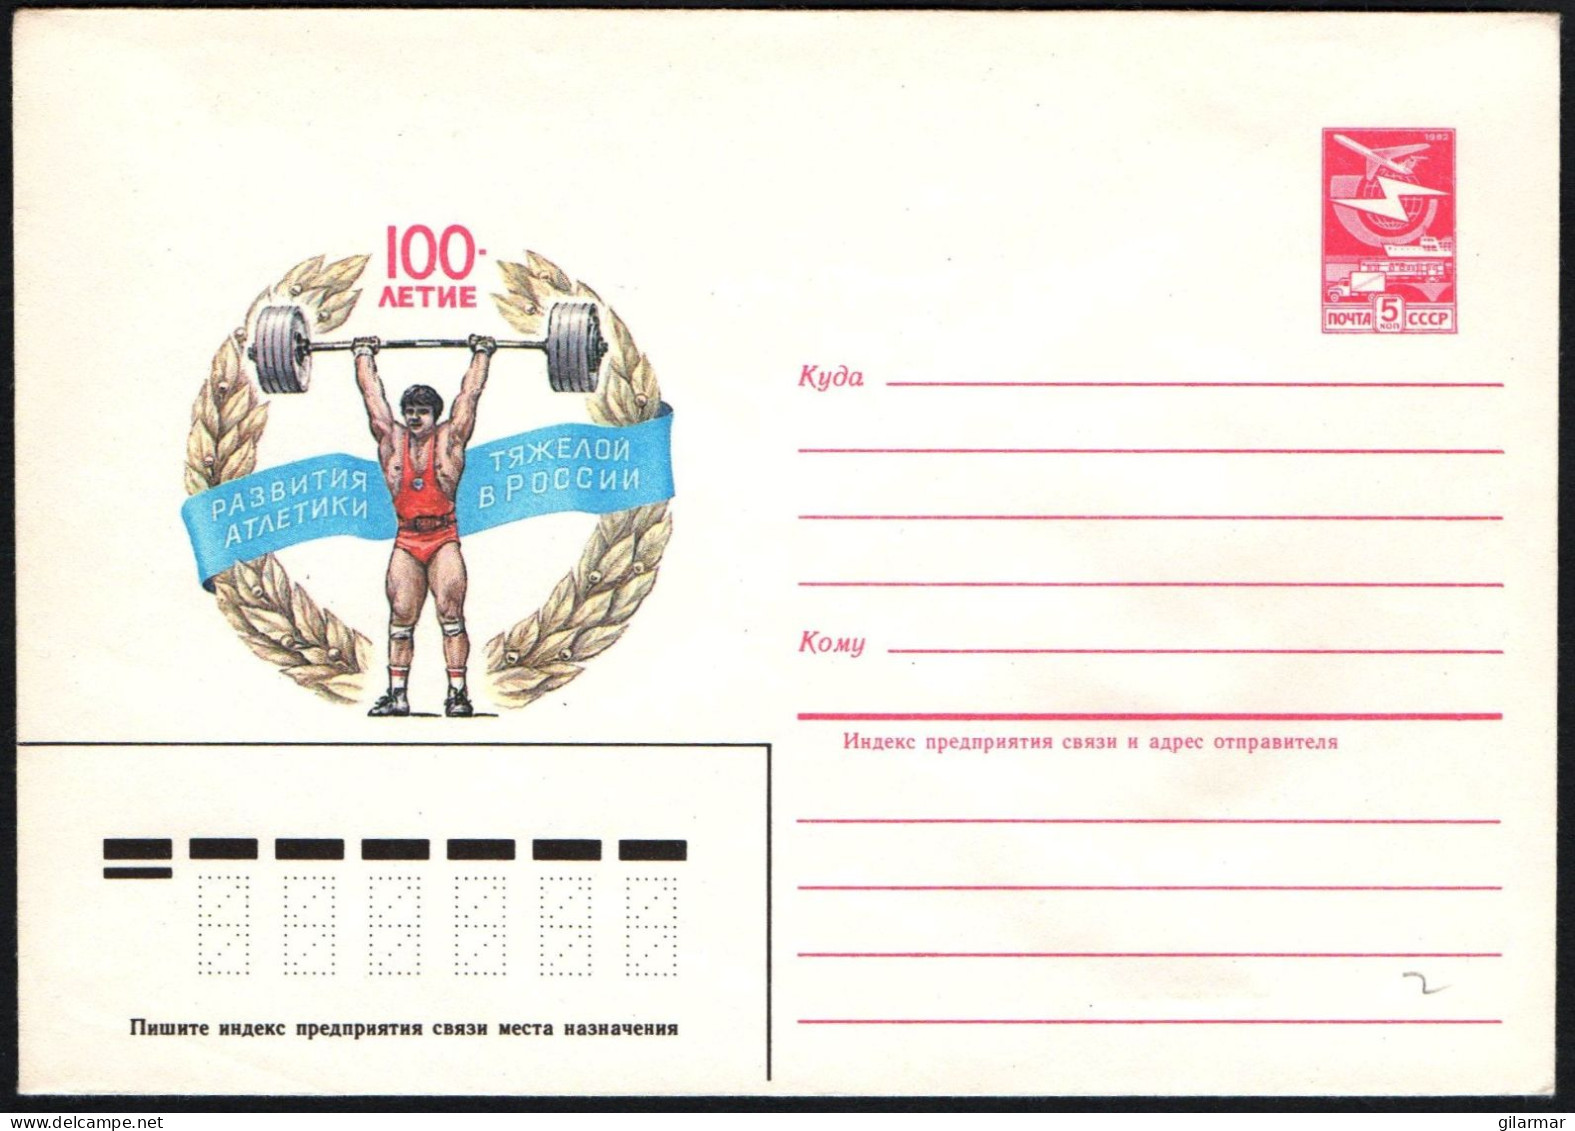 SOVIET UNION 1984 - 100th ANNIVERSARY OF WEIGHTLIFTING IN RUSSIA - MINT POSTAL STATIONERY - G - Haltérophilie